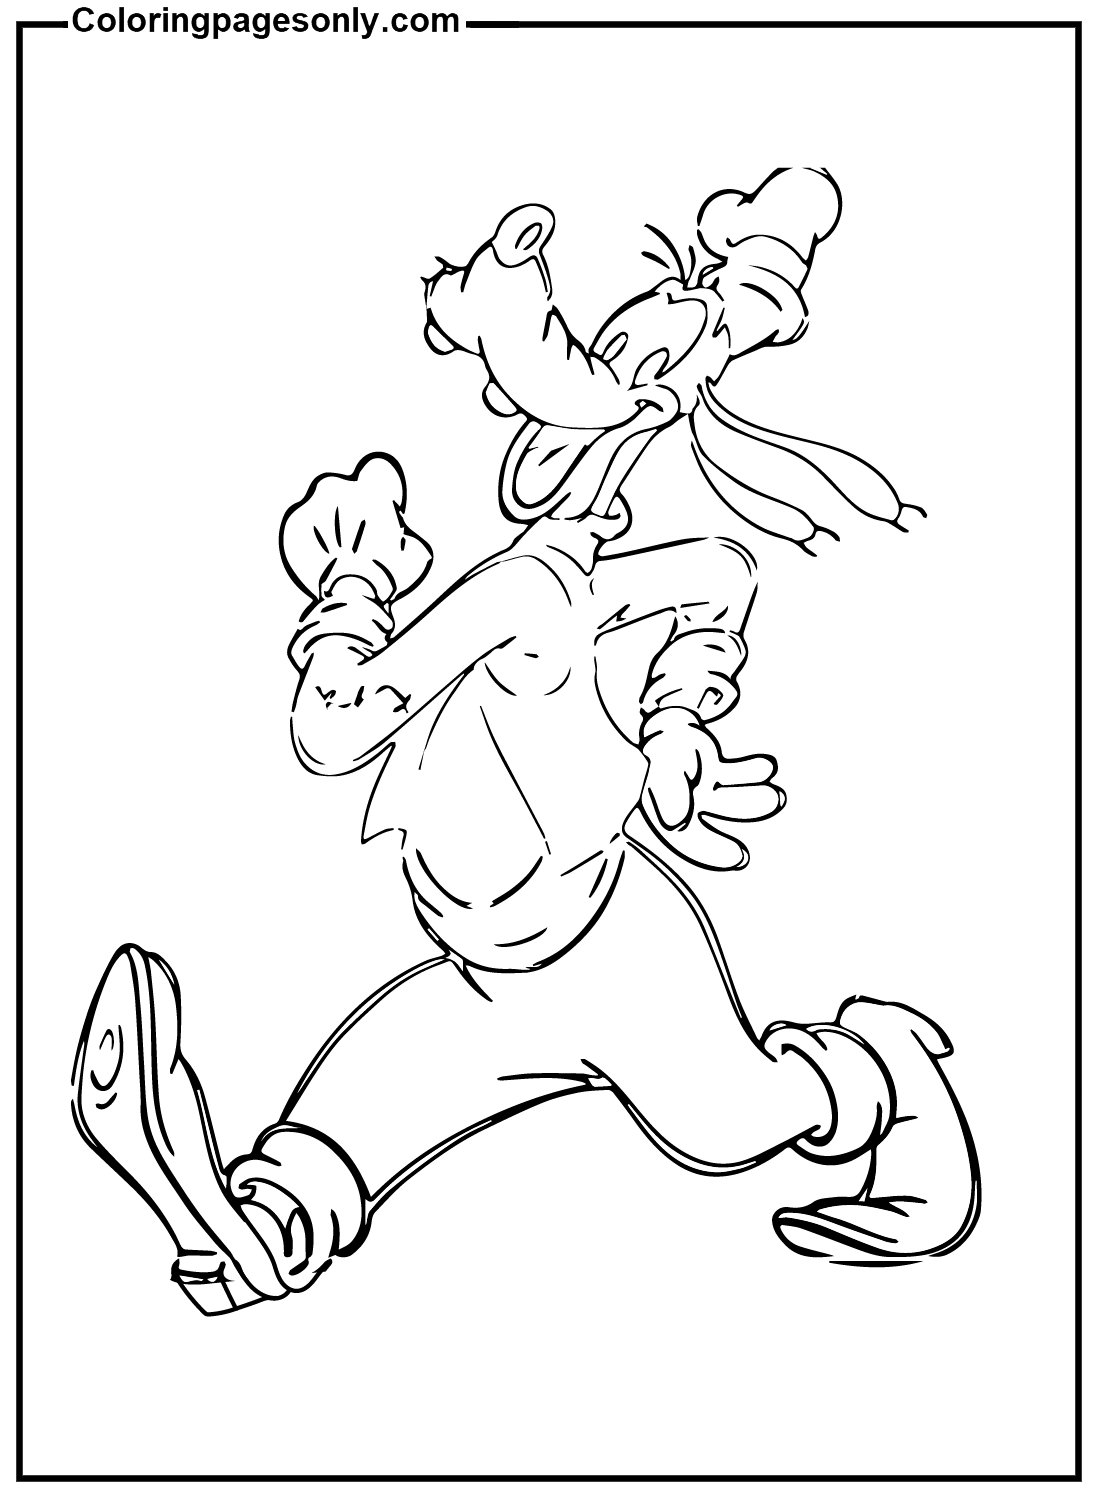 Goofy From Kingdom Hearts Coloring Pages